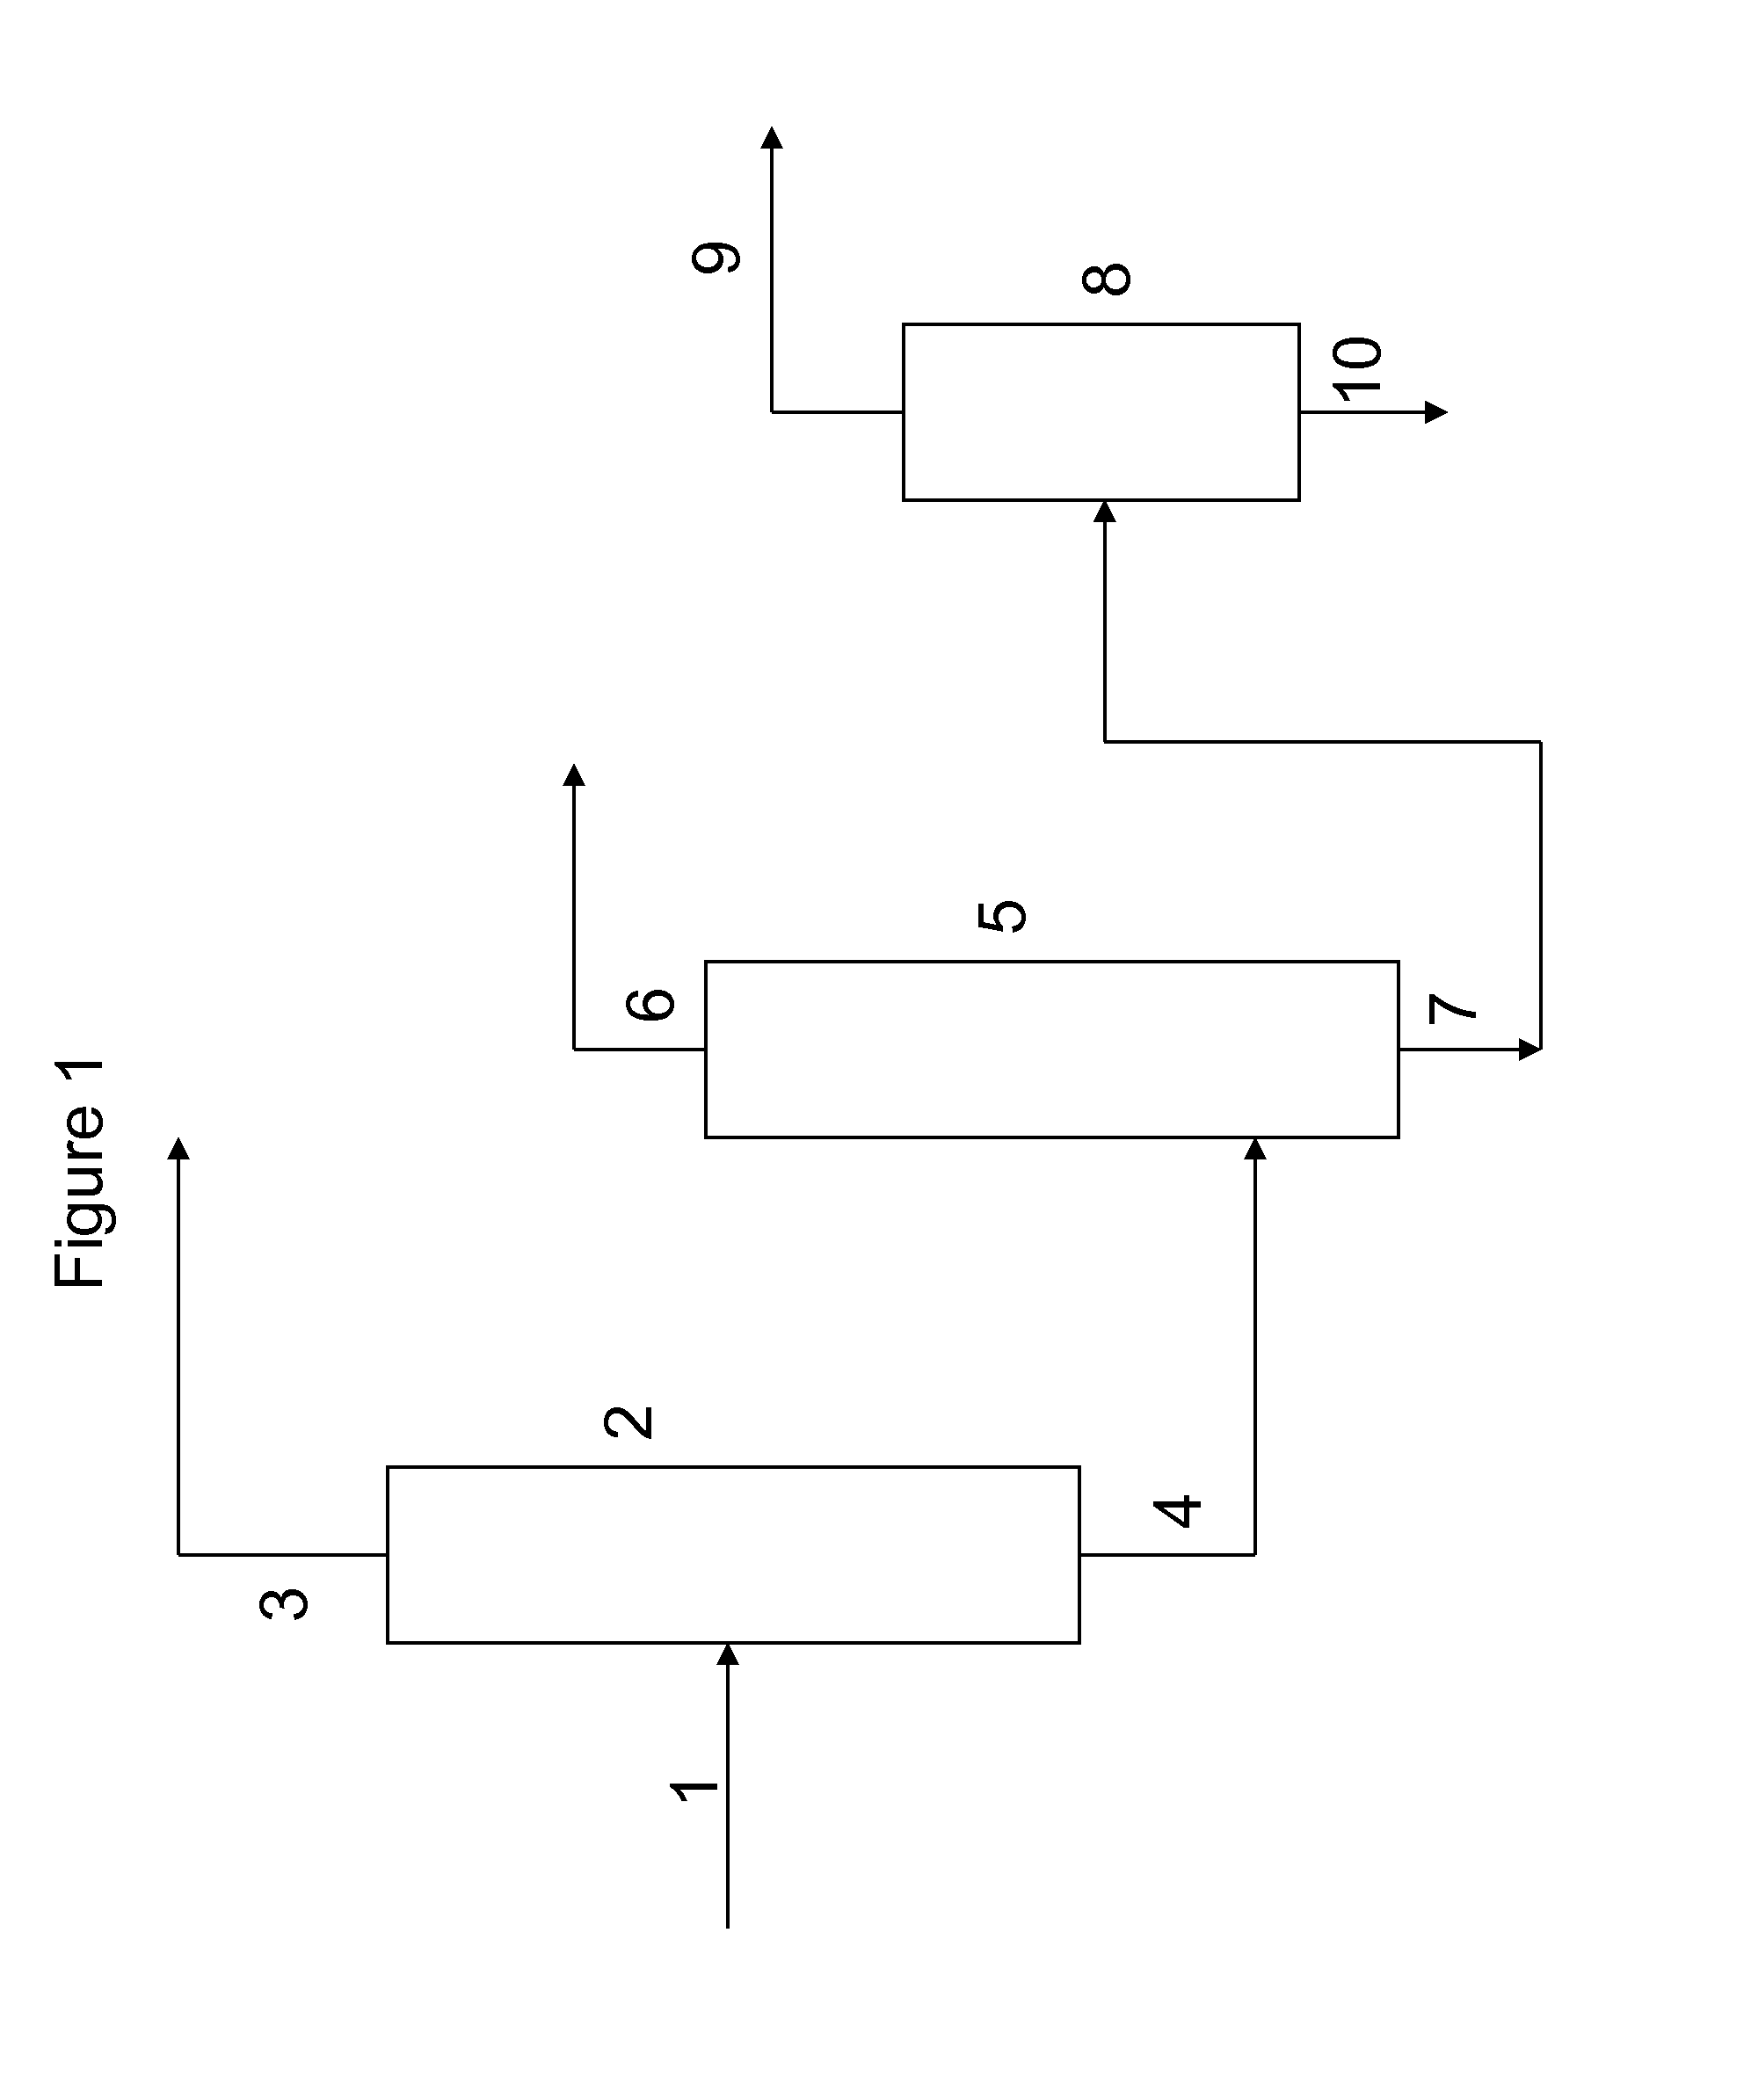 Method for Recovering Di-Trimethylolpropane and Trimethylolpropane-Enriched Product Streams From the Side Streams of Trimethylolpropane Production